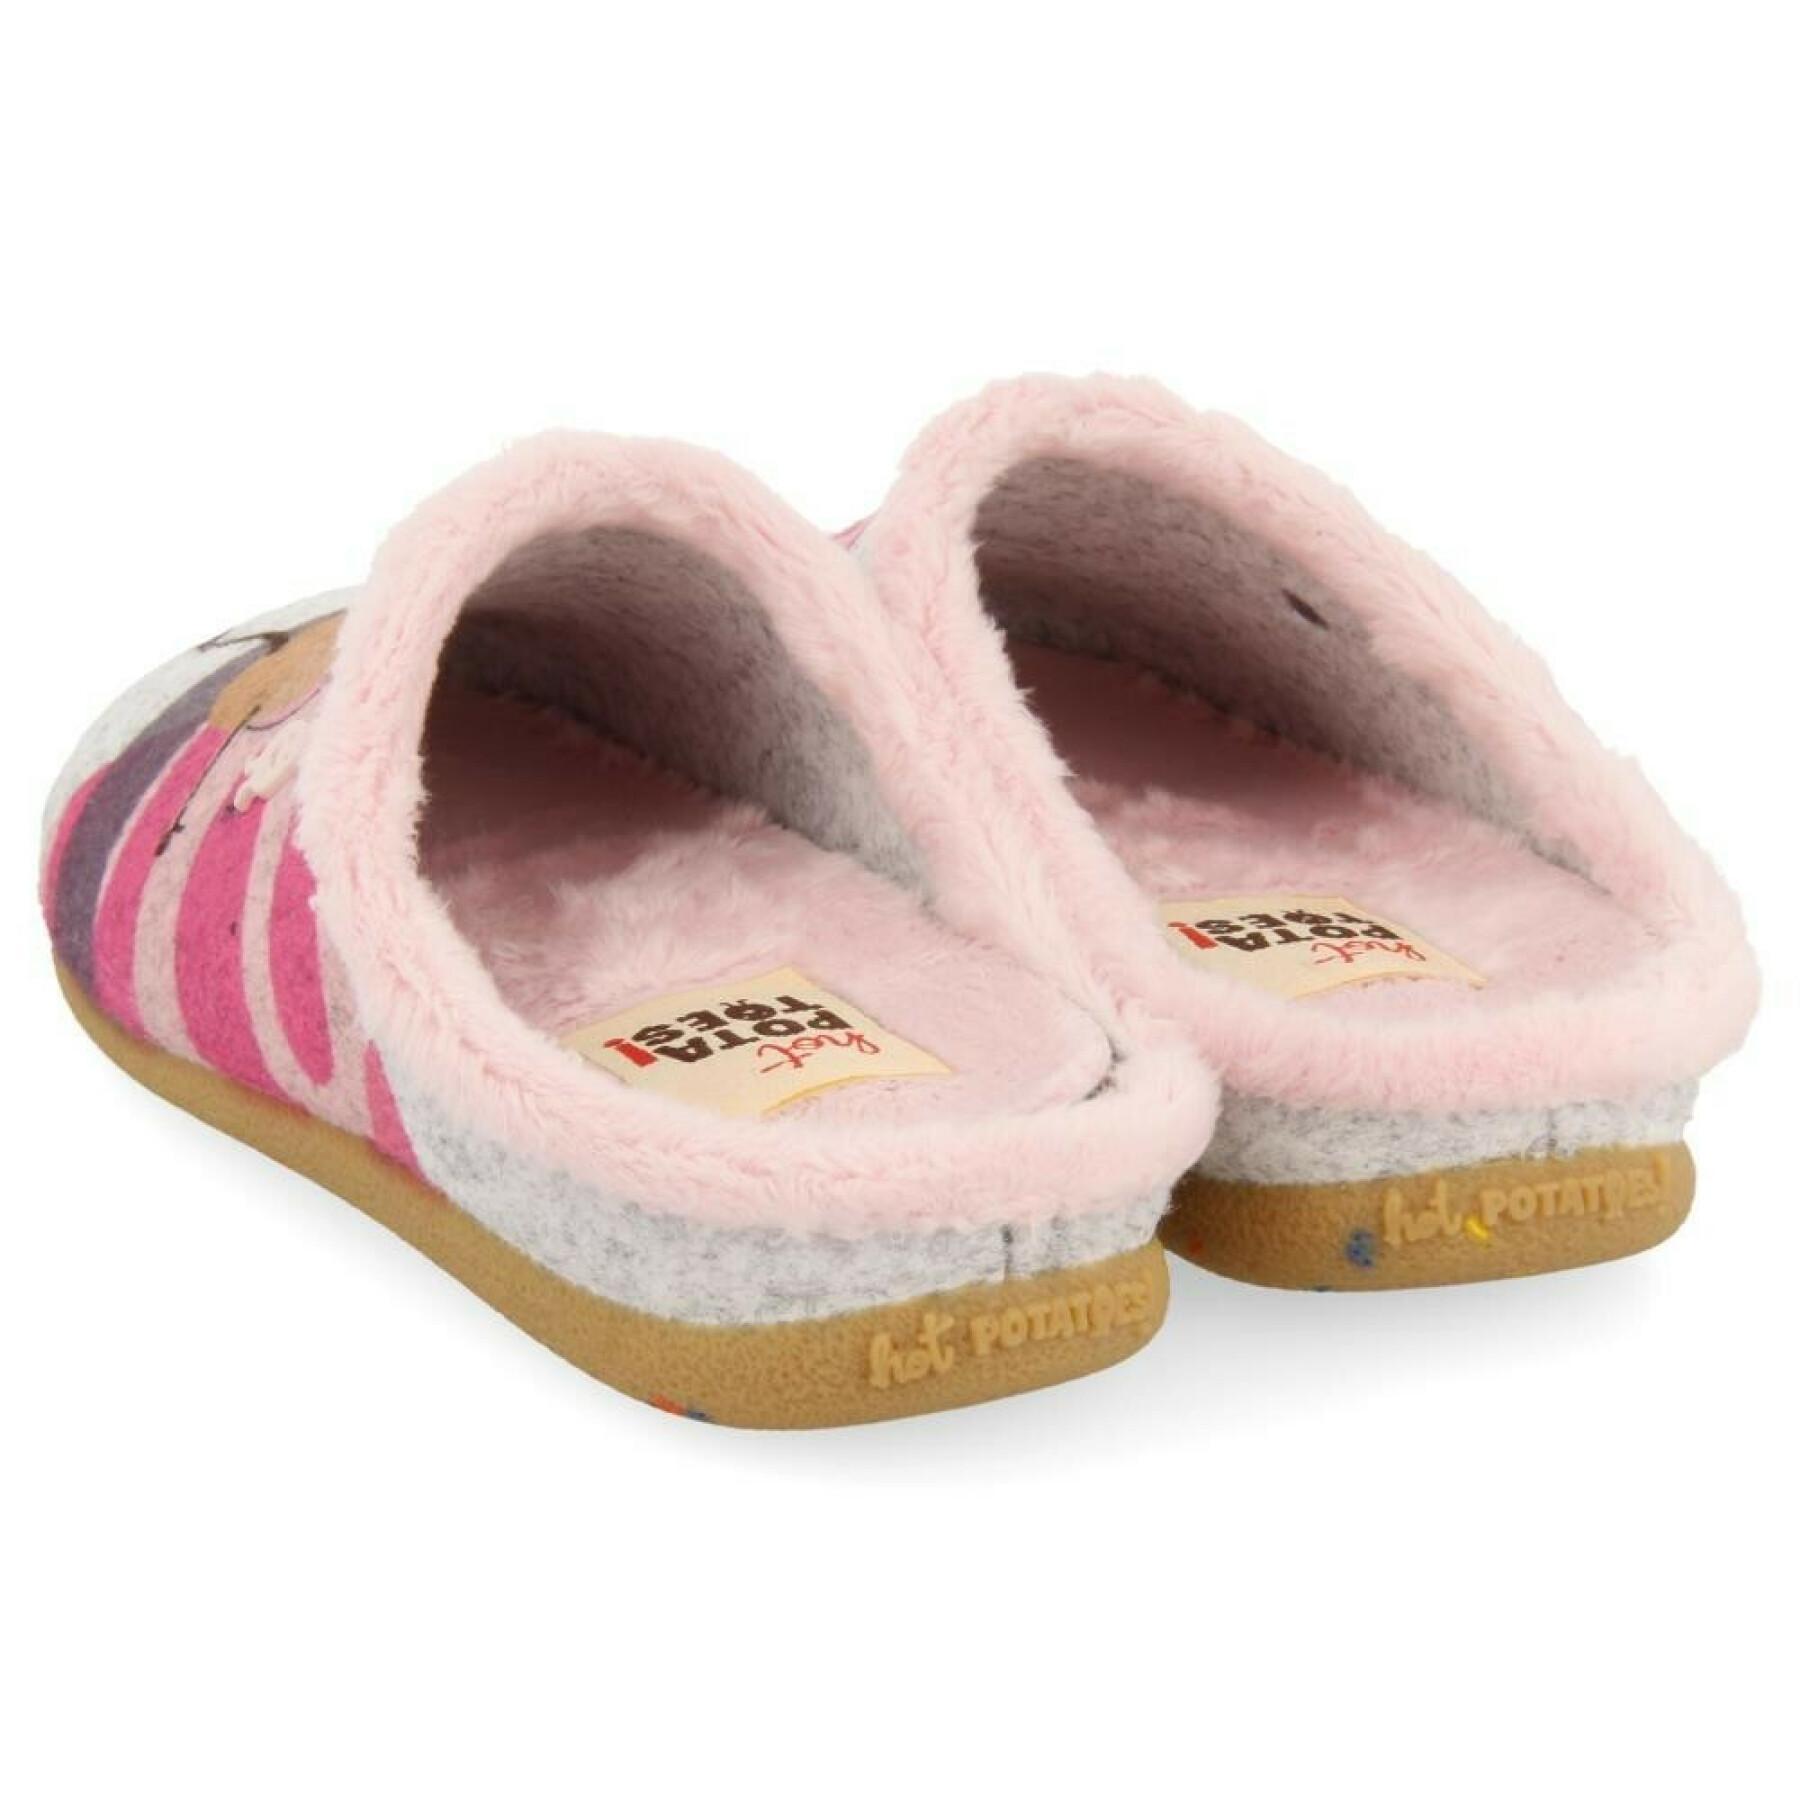 Slippers from the children's collection Hot Potatoes ligist